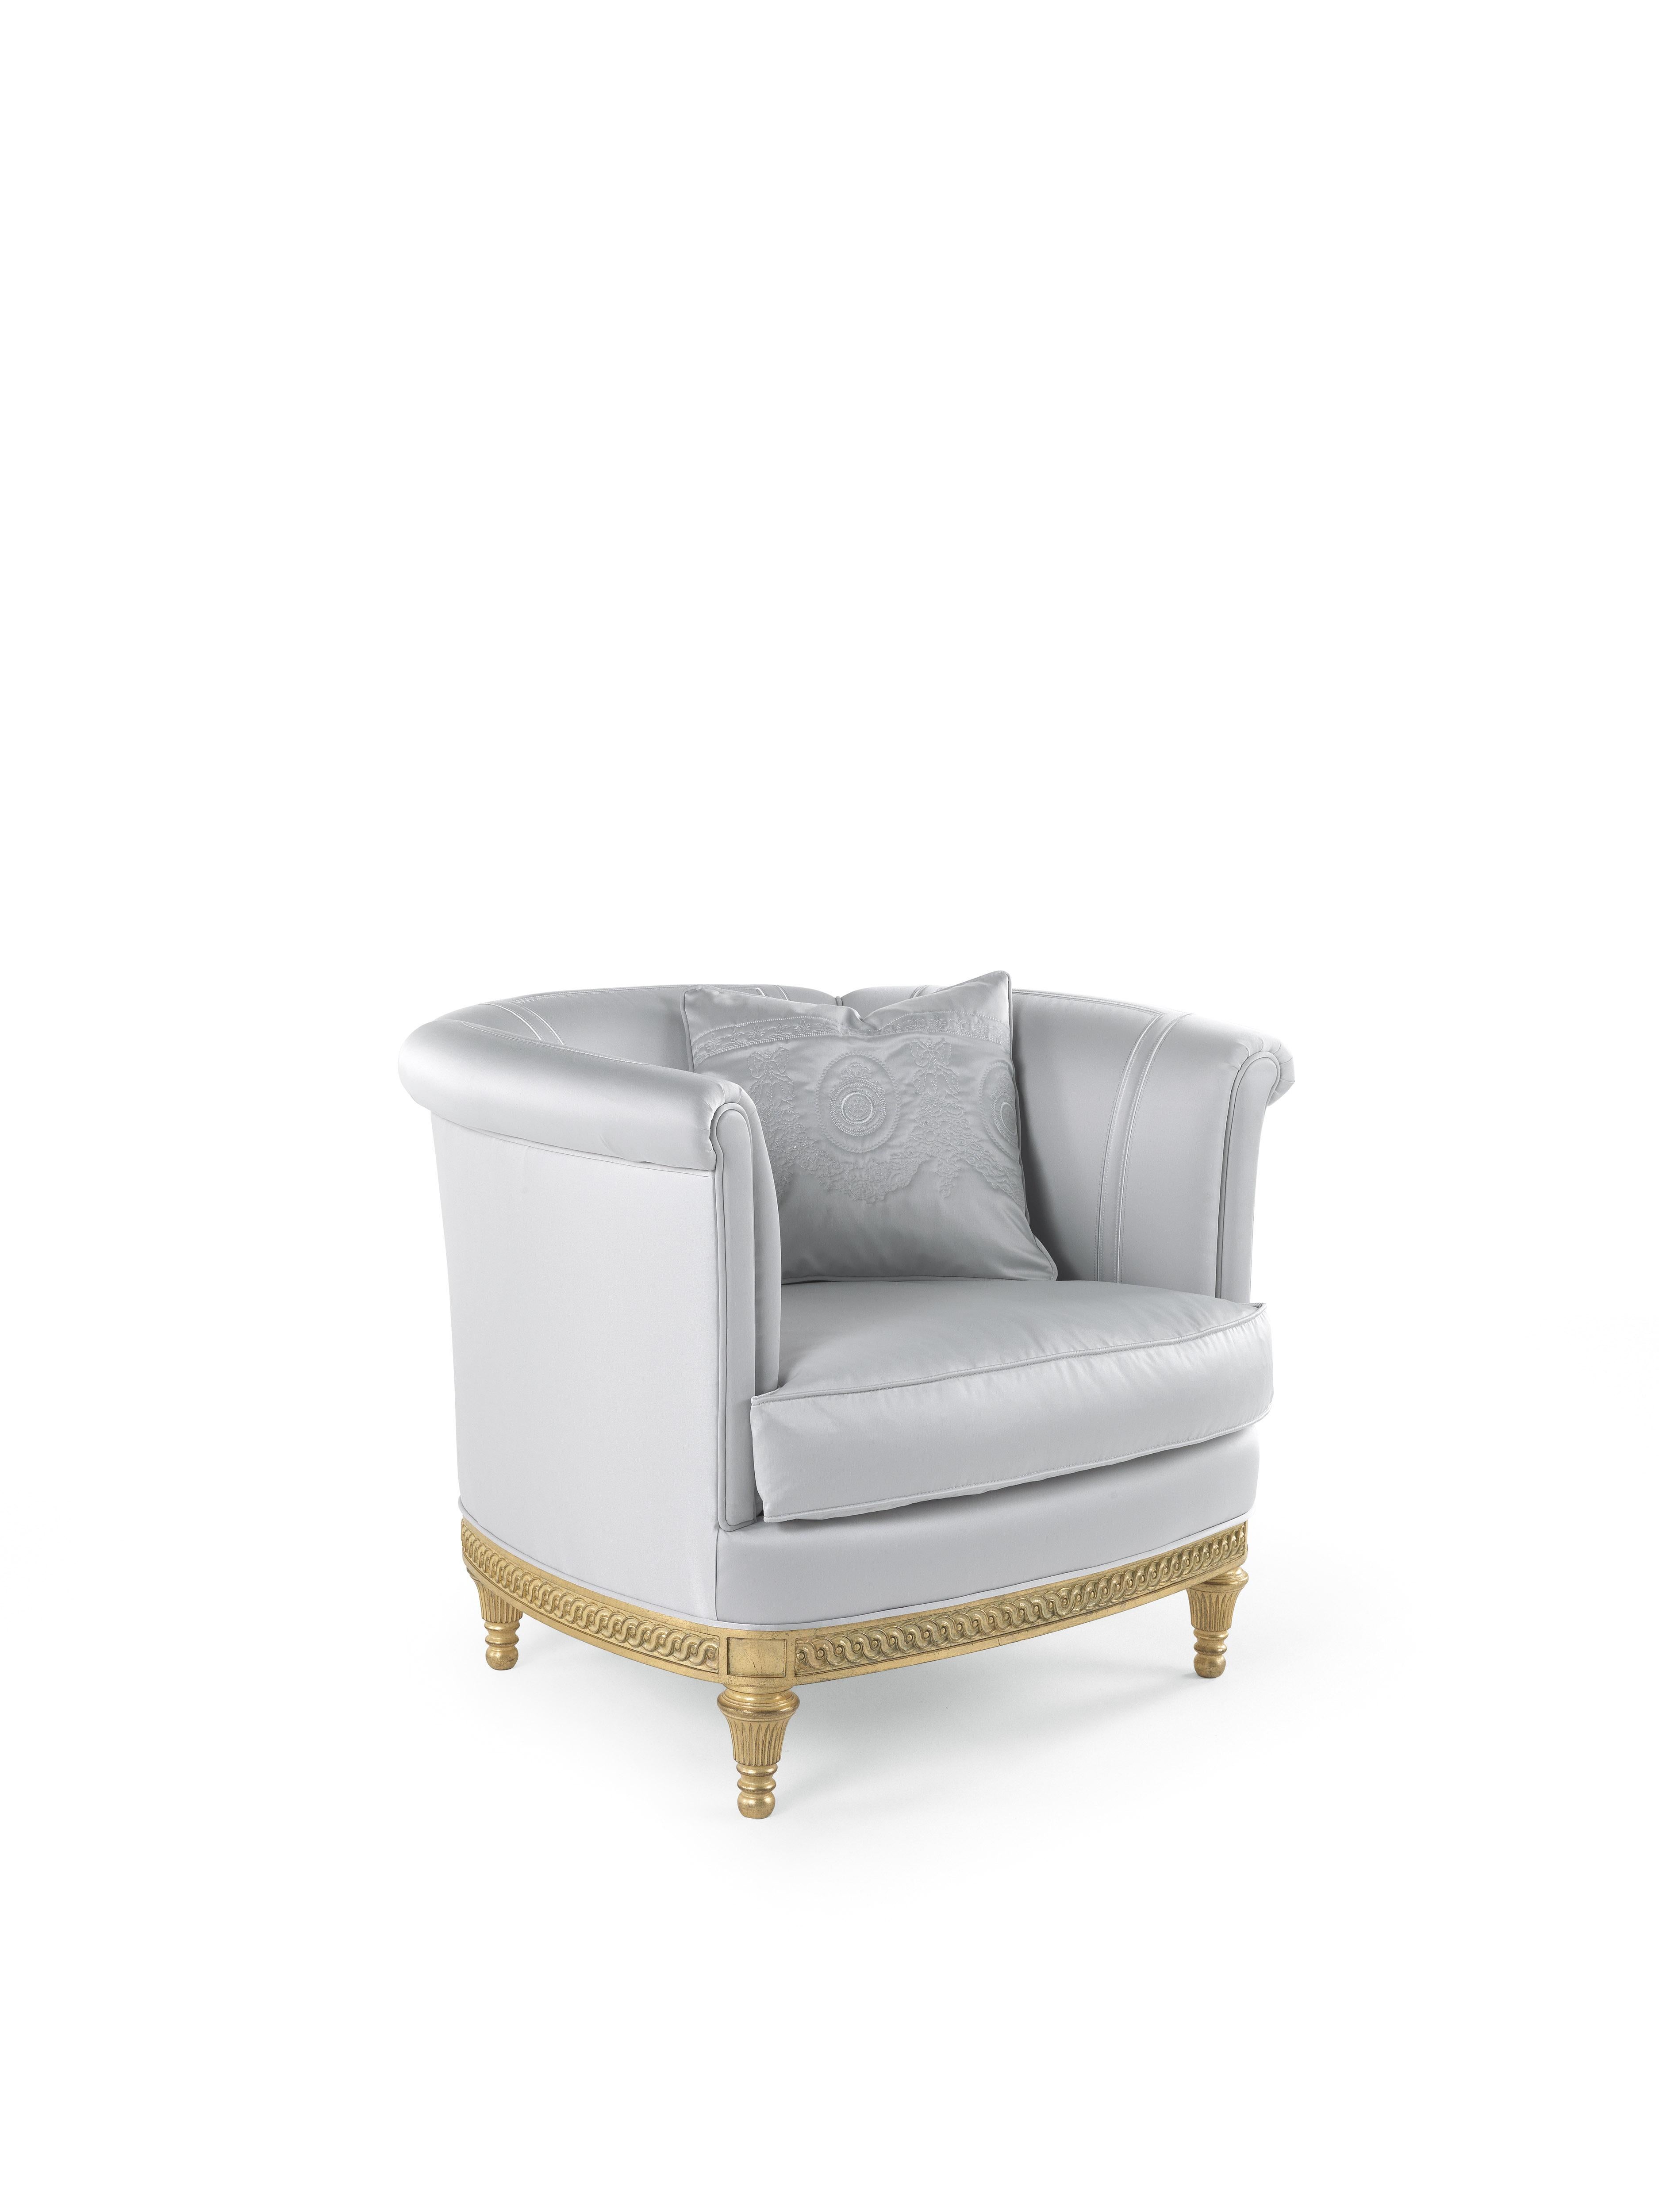 In Ivy armchair, the fresh and light-filled approach to the classic style typical of Jumbo Collection’s New Era is found in the soft and refined tones of the upholstery with embroidery in relief and in the artisan manufacturing of the hand-carved